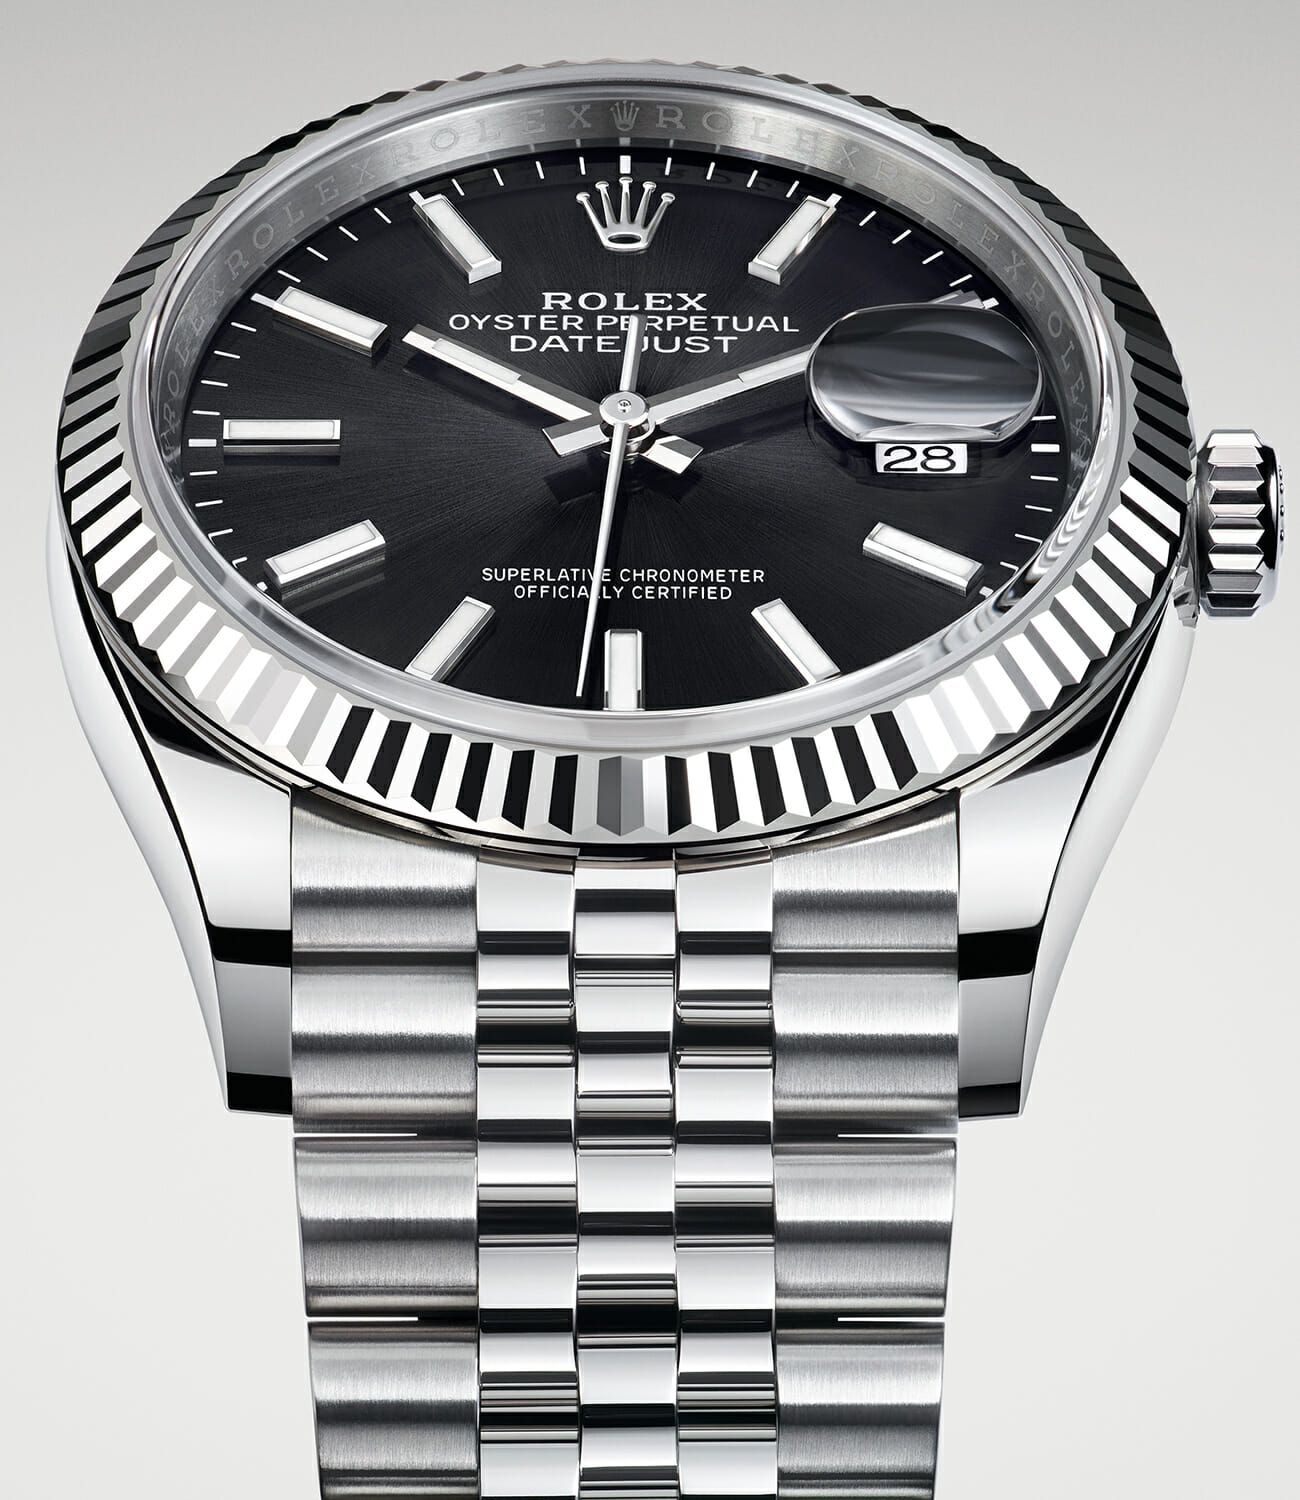 Rolex Just Gave its Iconic Datejust 